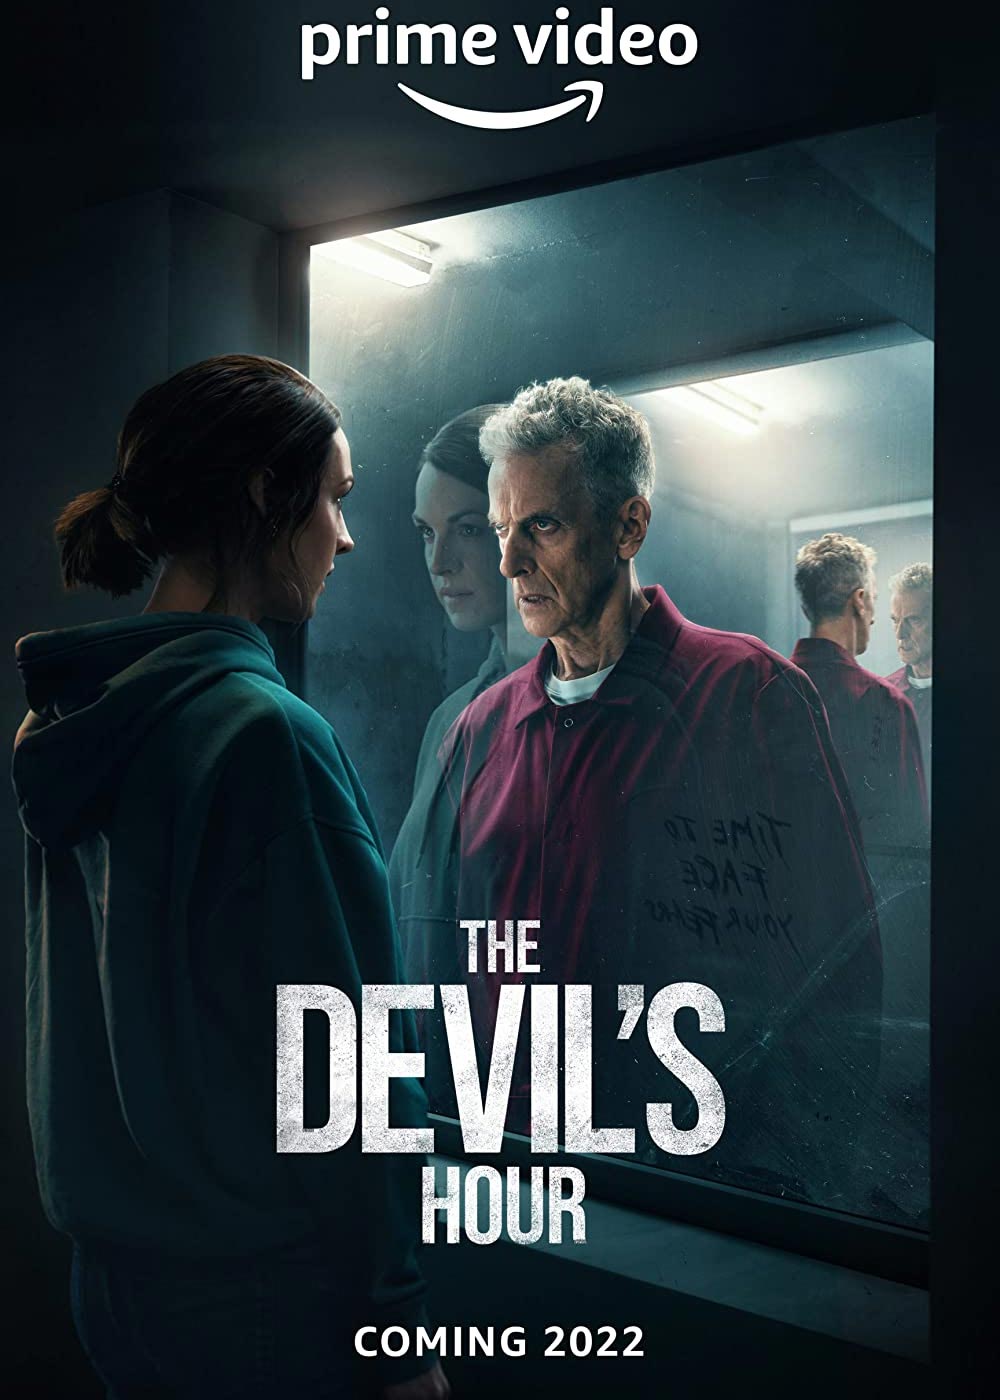 The Devils Hour (2022) 720p HEVC HDRip S01 Complete [Dual Audio] [Hindi or English] x265 ESubs Download